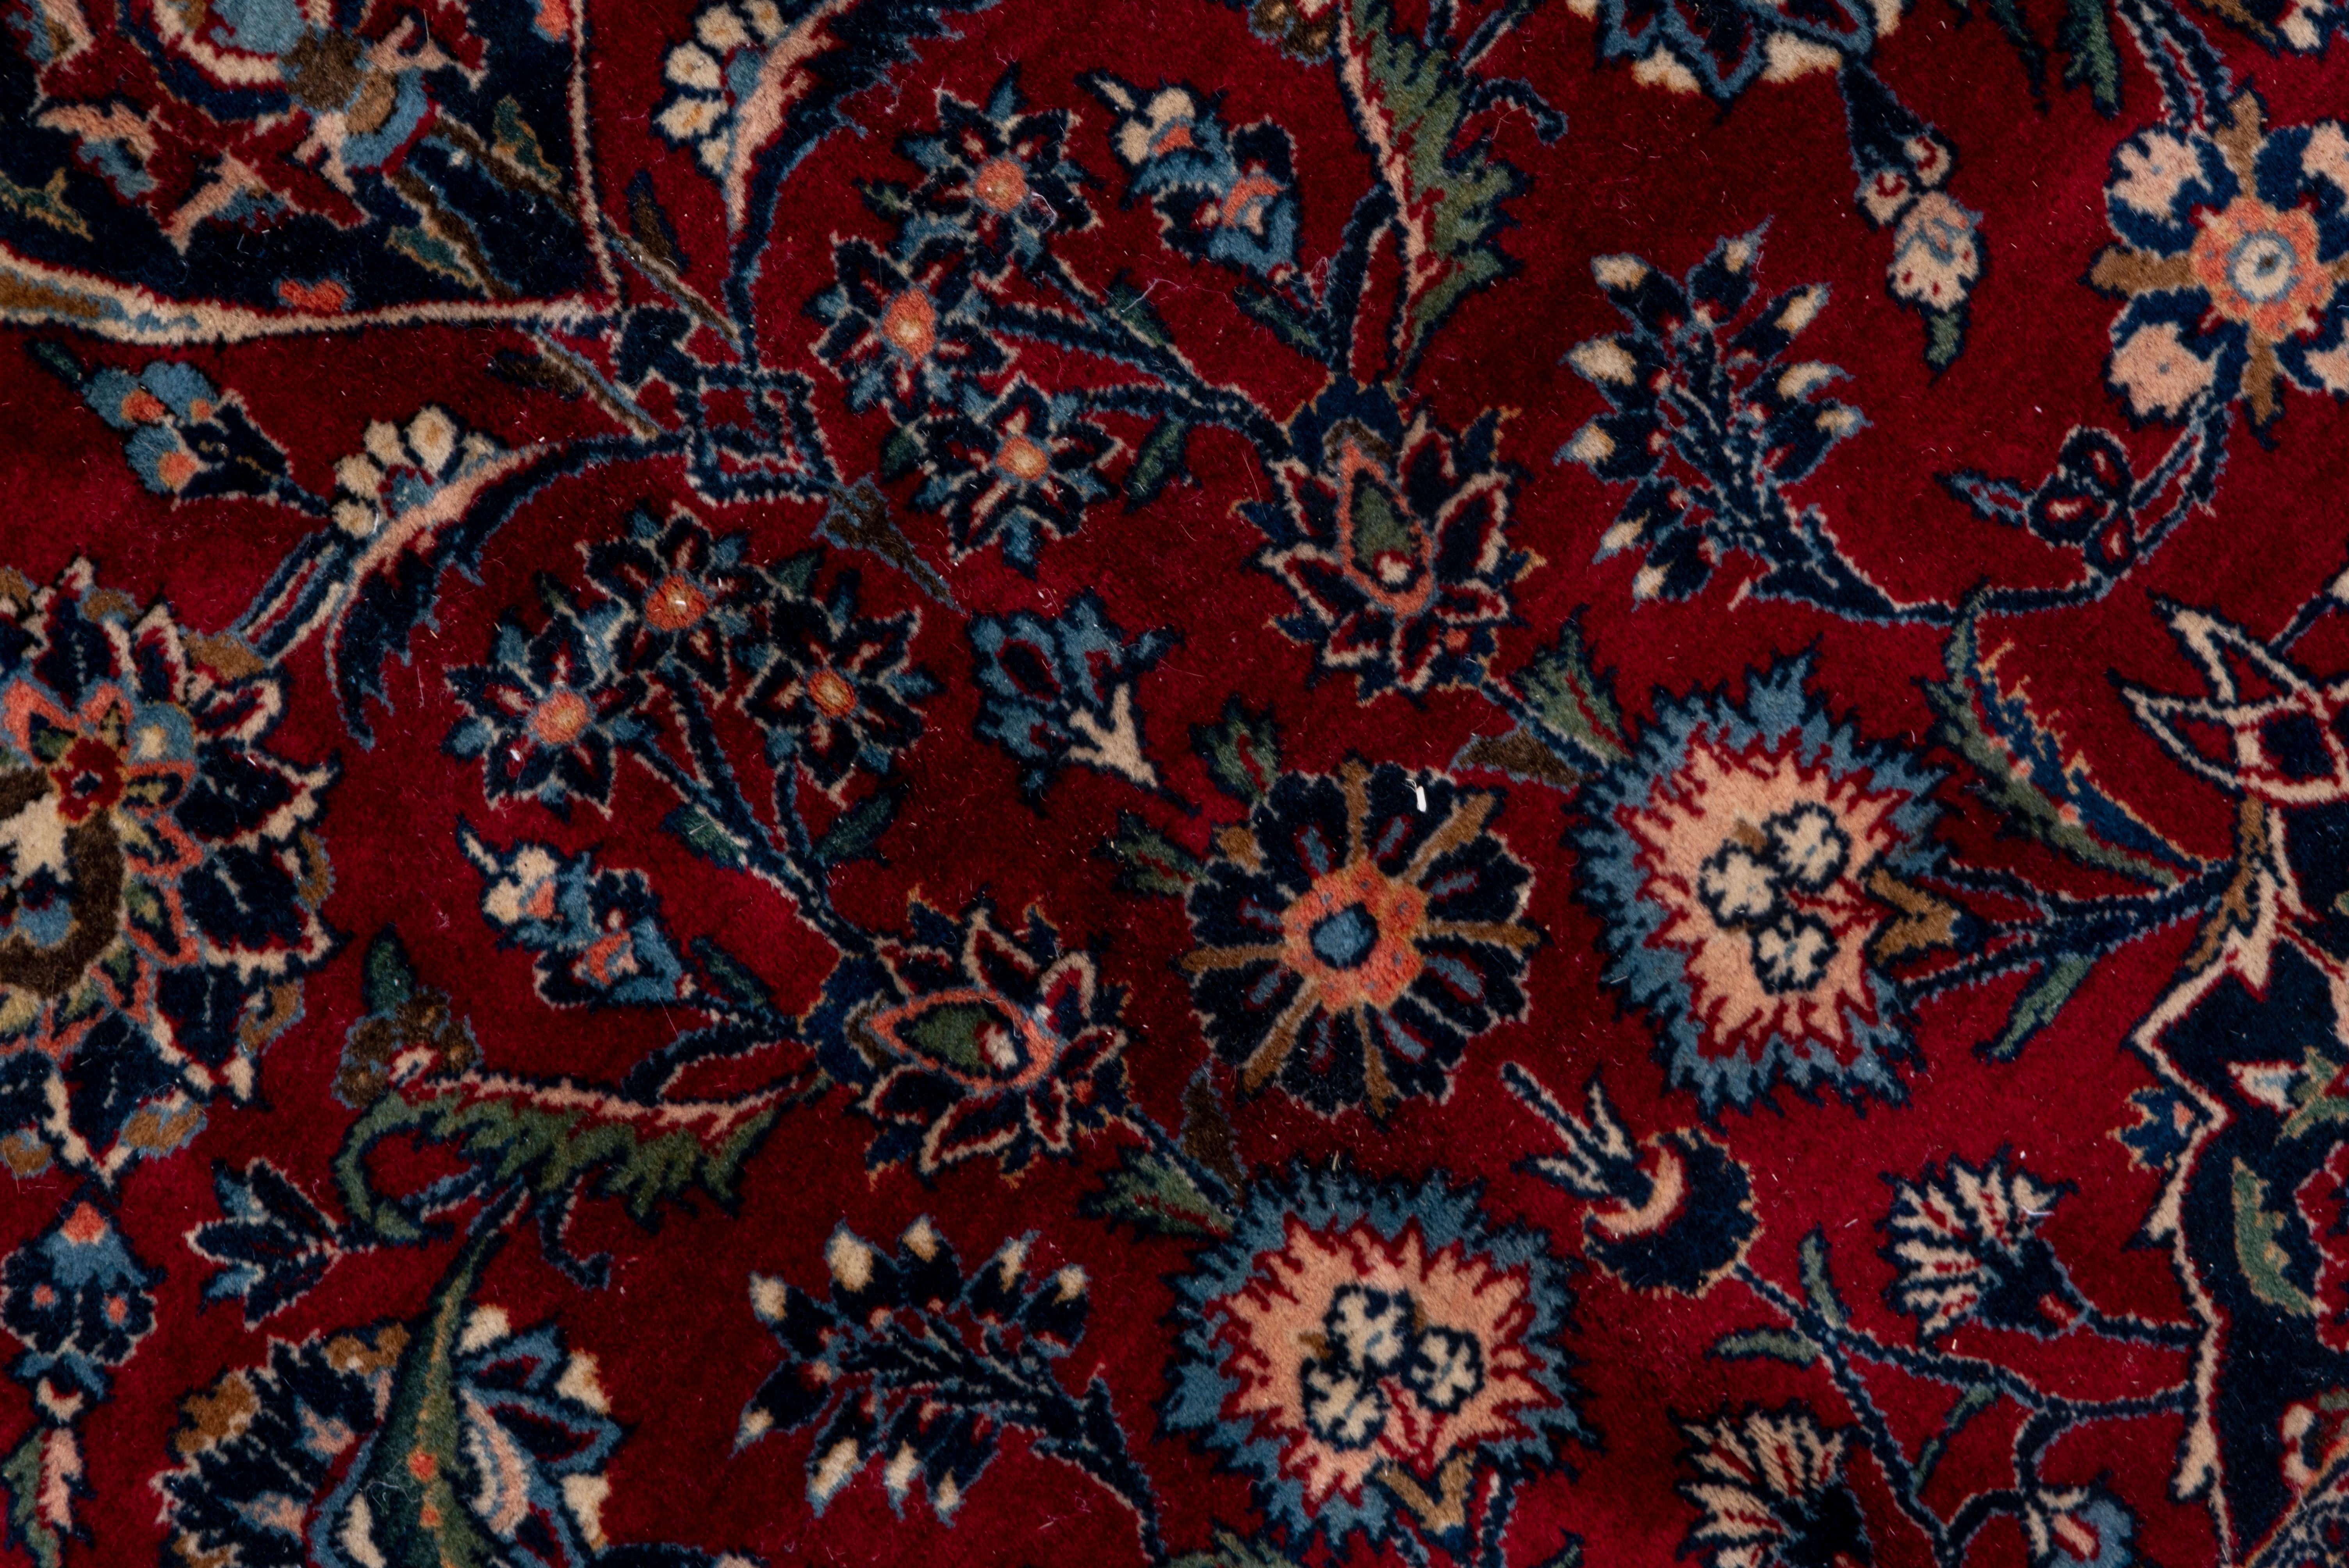 Mid-20th Century Antique Persian Kashan Carpet, Dark Red Field, Navy Borders, Baby Blue Accents For Sale